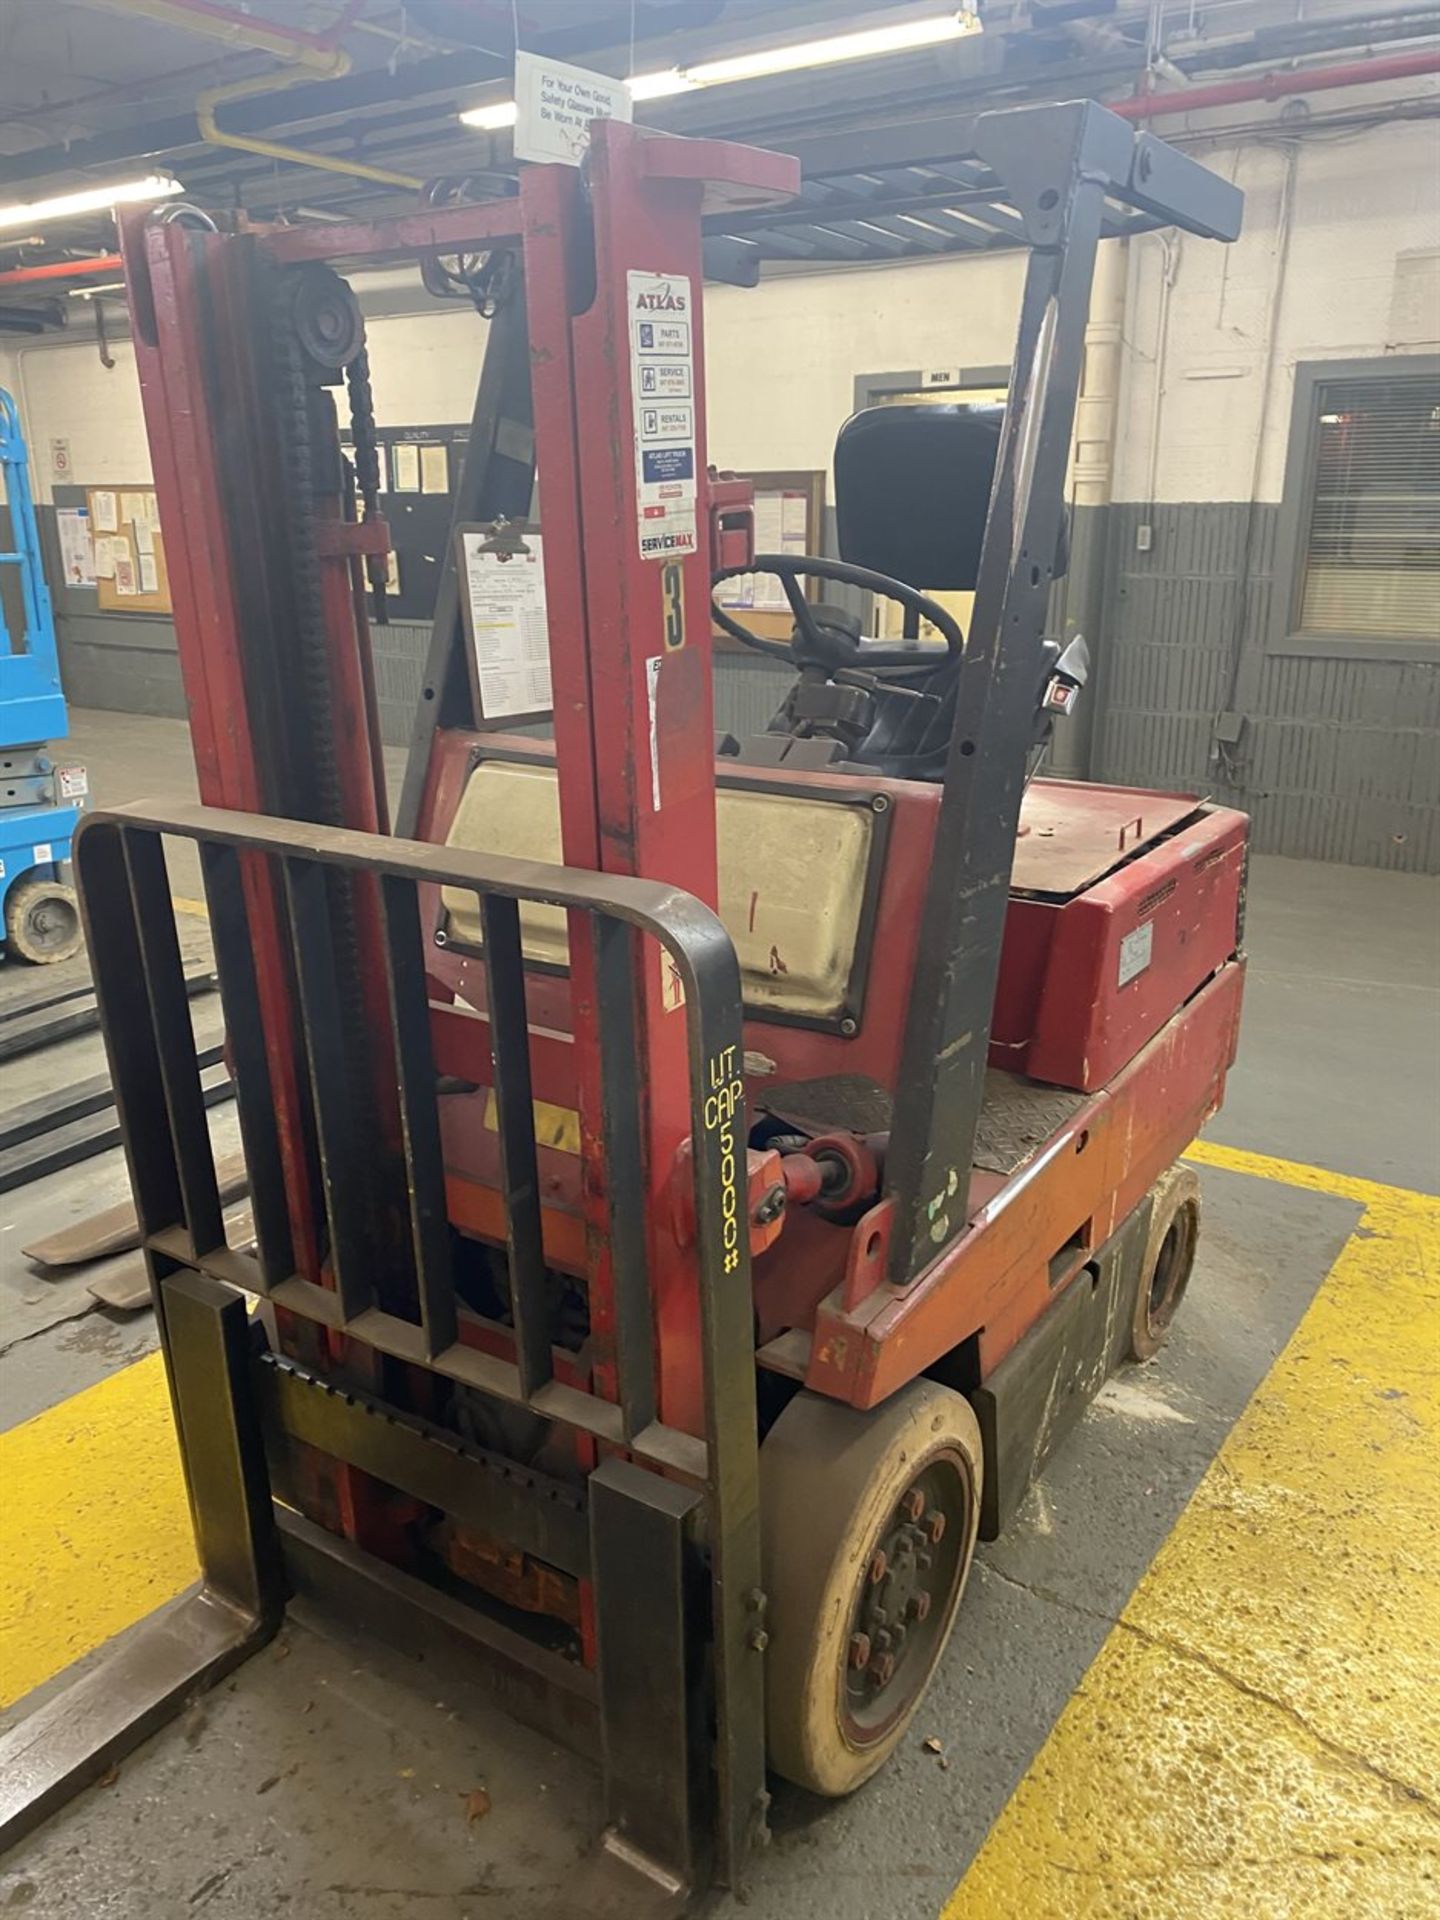 TOYOTA 2FBCA25 Electric Forklift, s/n 11711, 5000 LB Capacity, Triple Mast, (Not Currently Running) - Image 3 of 5